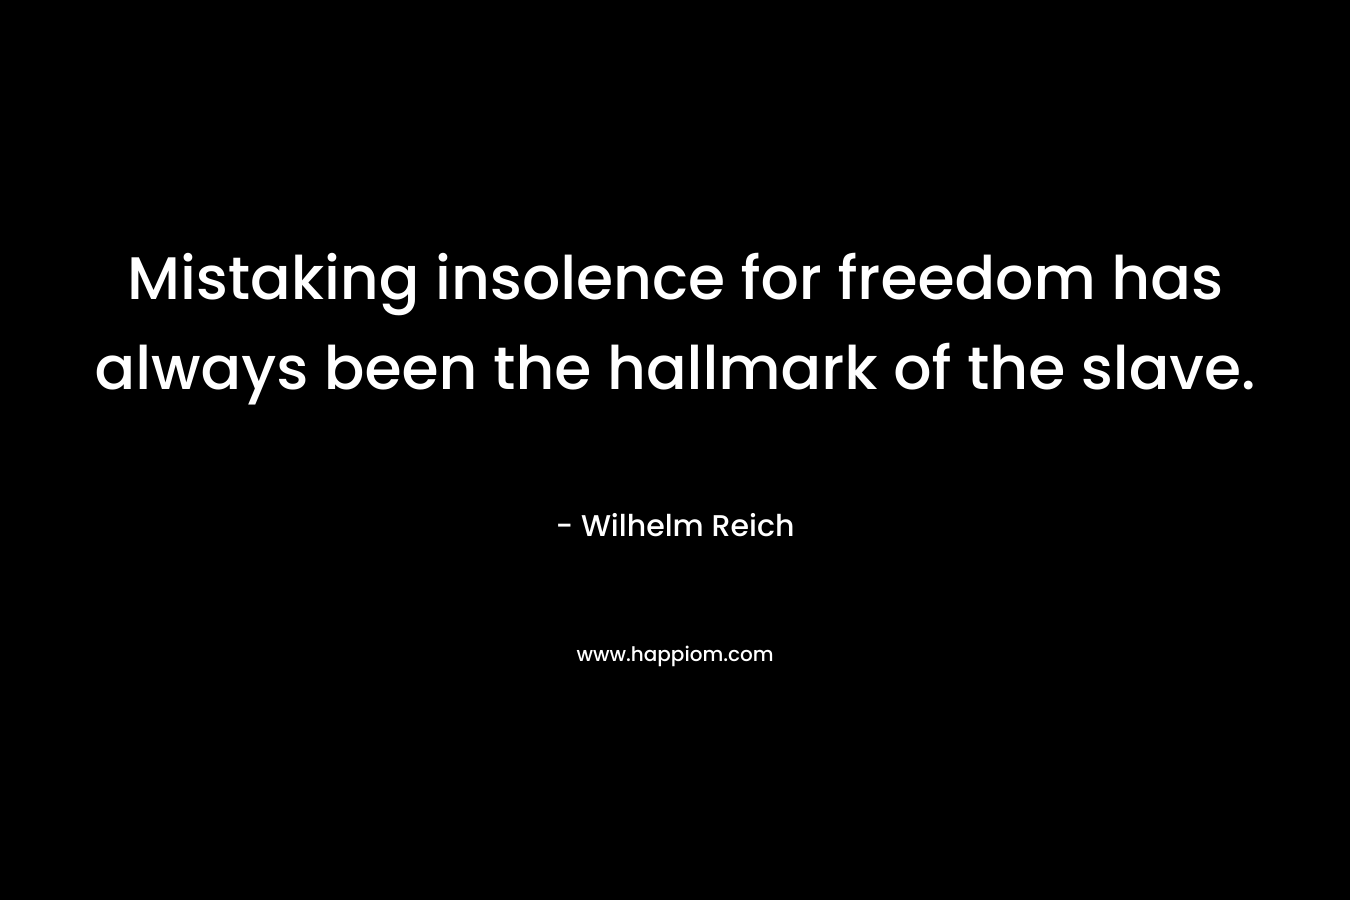 Mistaking insolence for freedom has always been the hallmark of the slave. – Wilhelm Reich